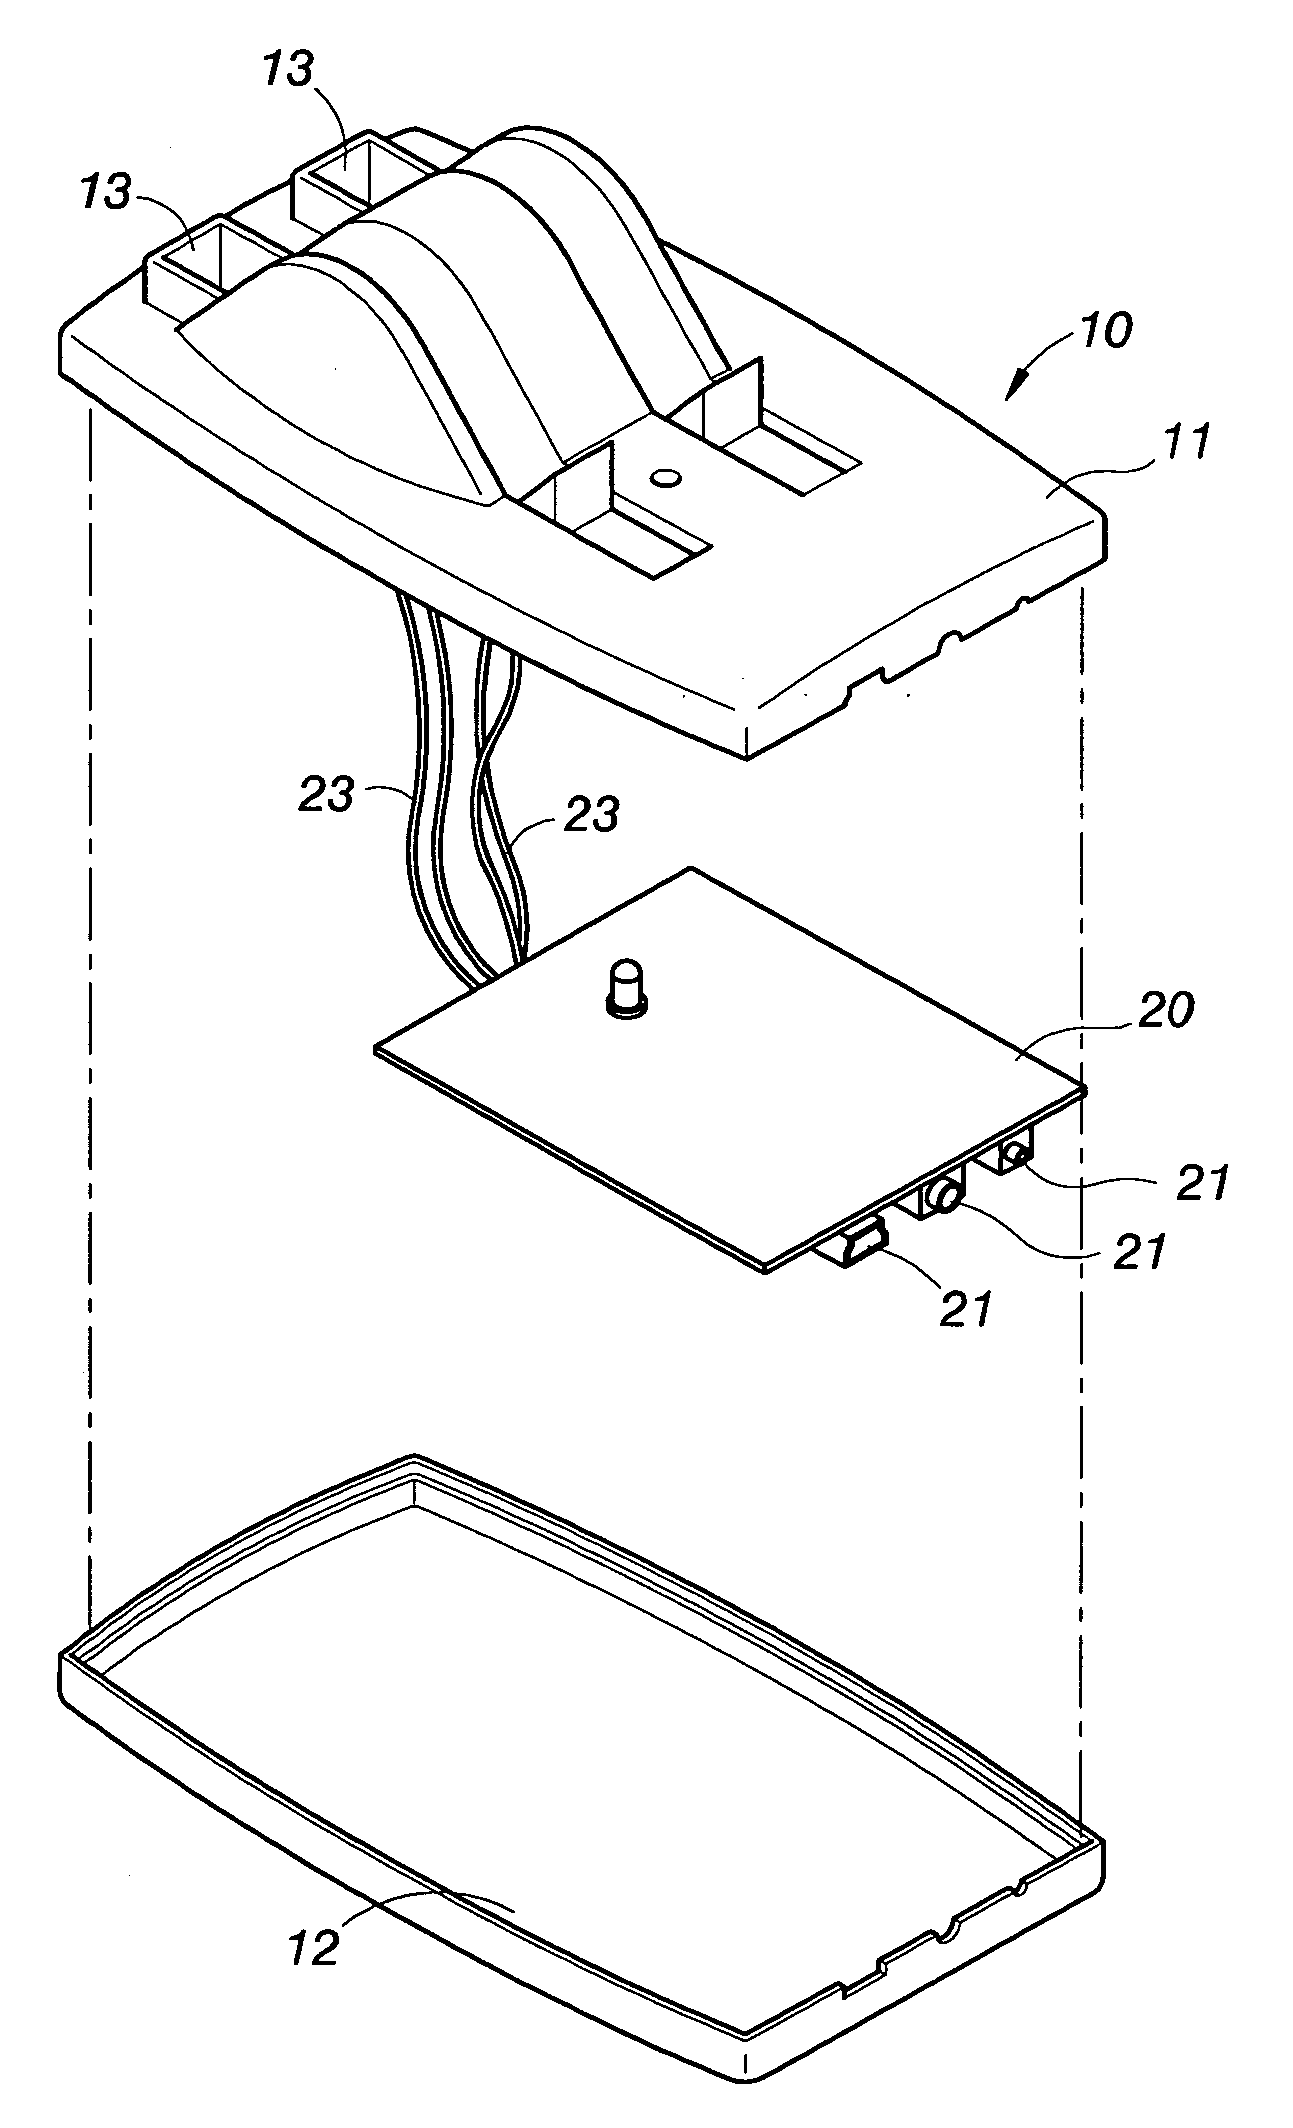 Composite charging cradle for rechargeable battery